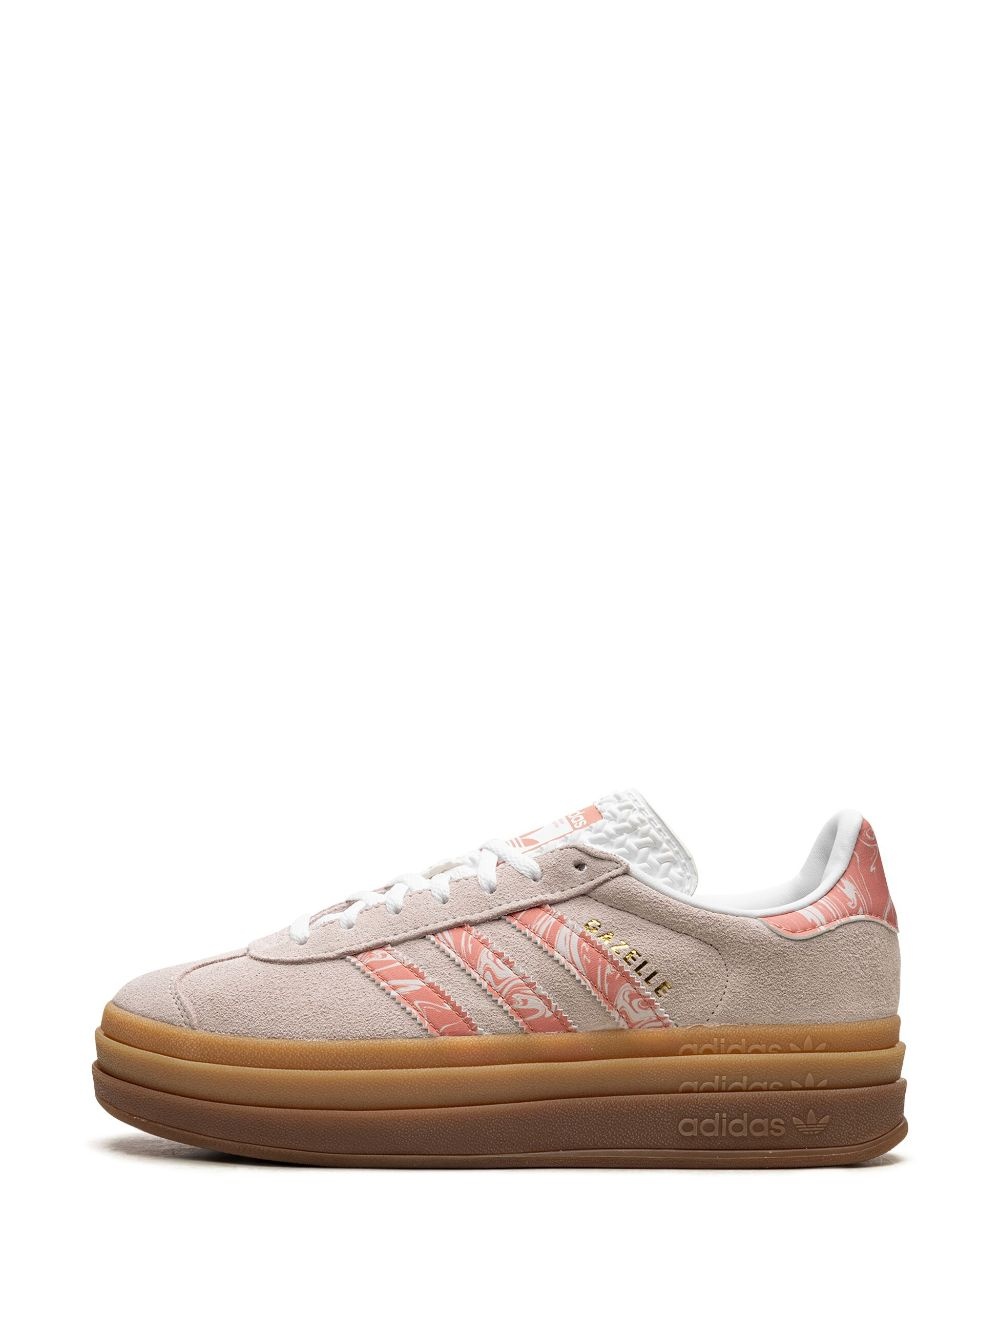 Gazelle Bold "Putty Mauve/Wonder Clay/Cloud White" sneakers - 5